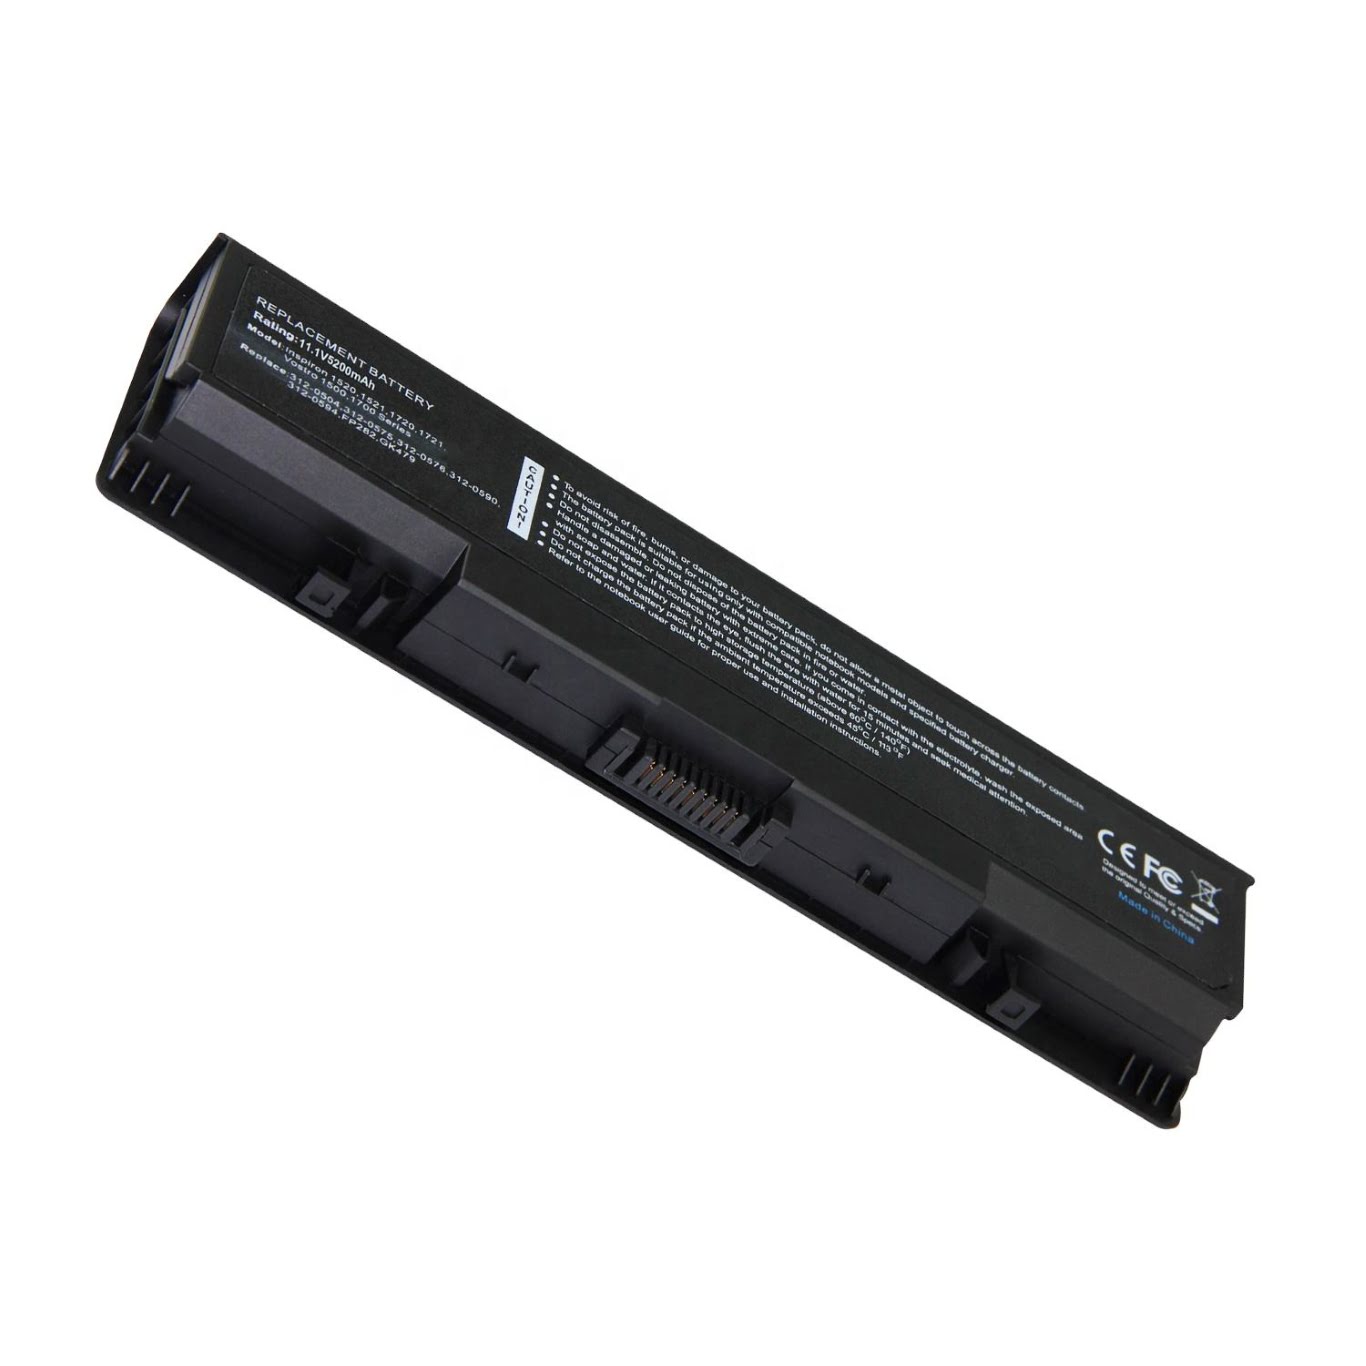 0DY375, 0FP282 replacement Laptop Battery for Dell Inspiron 1520, Inspiron 1521, 6 cells, 11.1V, 4400ma